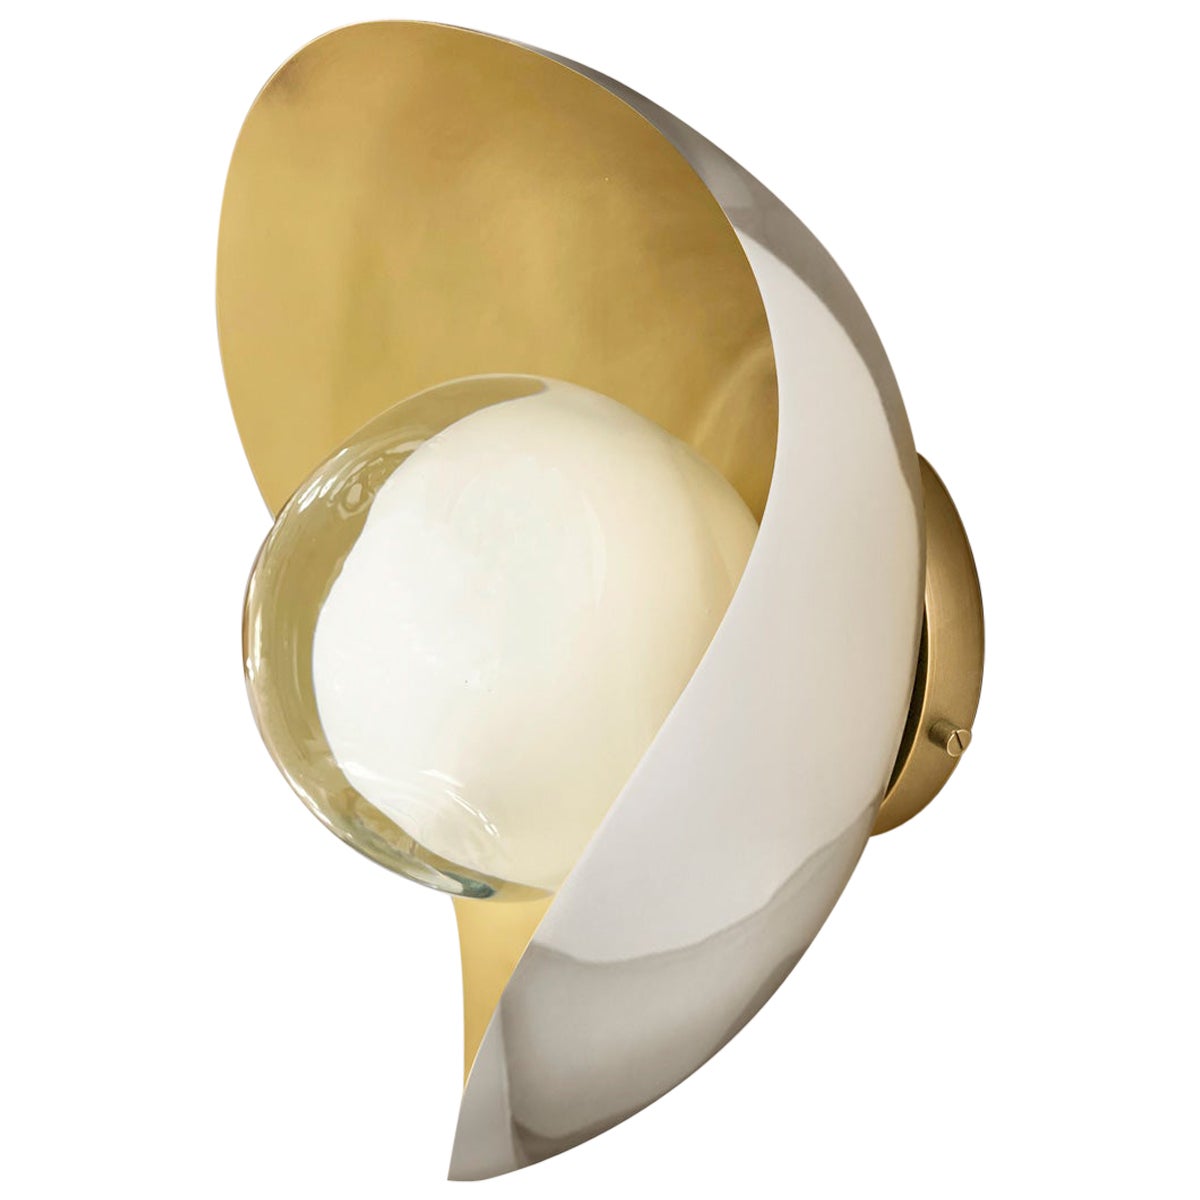 Perla Wall Light by Gaspare Asaro-Satin Brass/Polished Nickel Finish For Sale